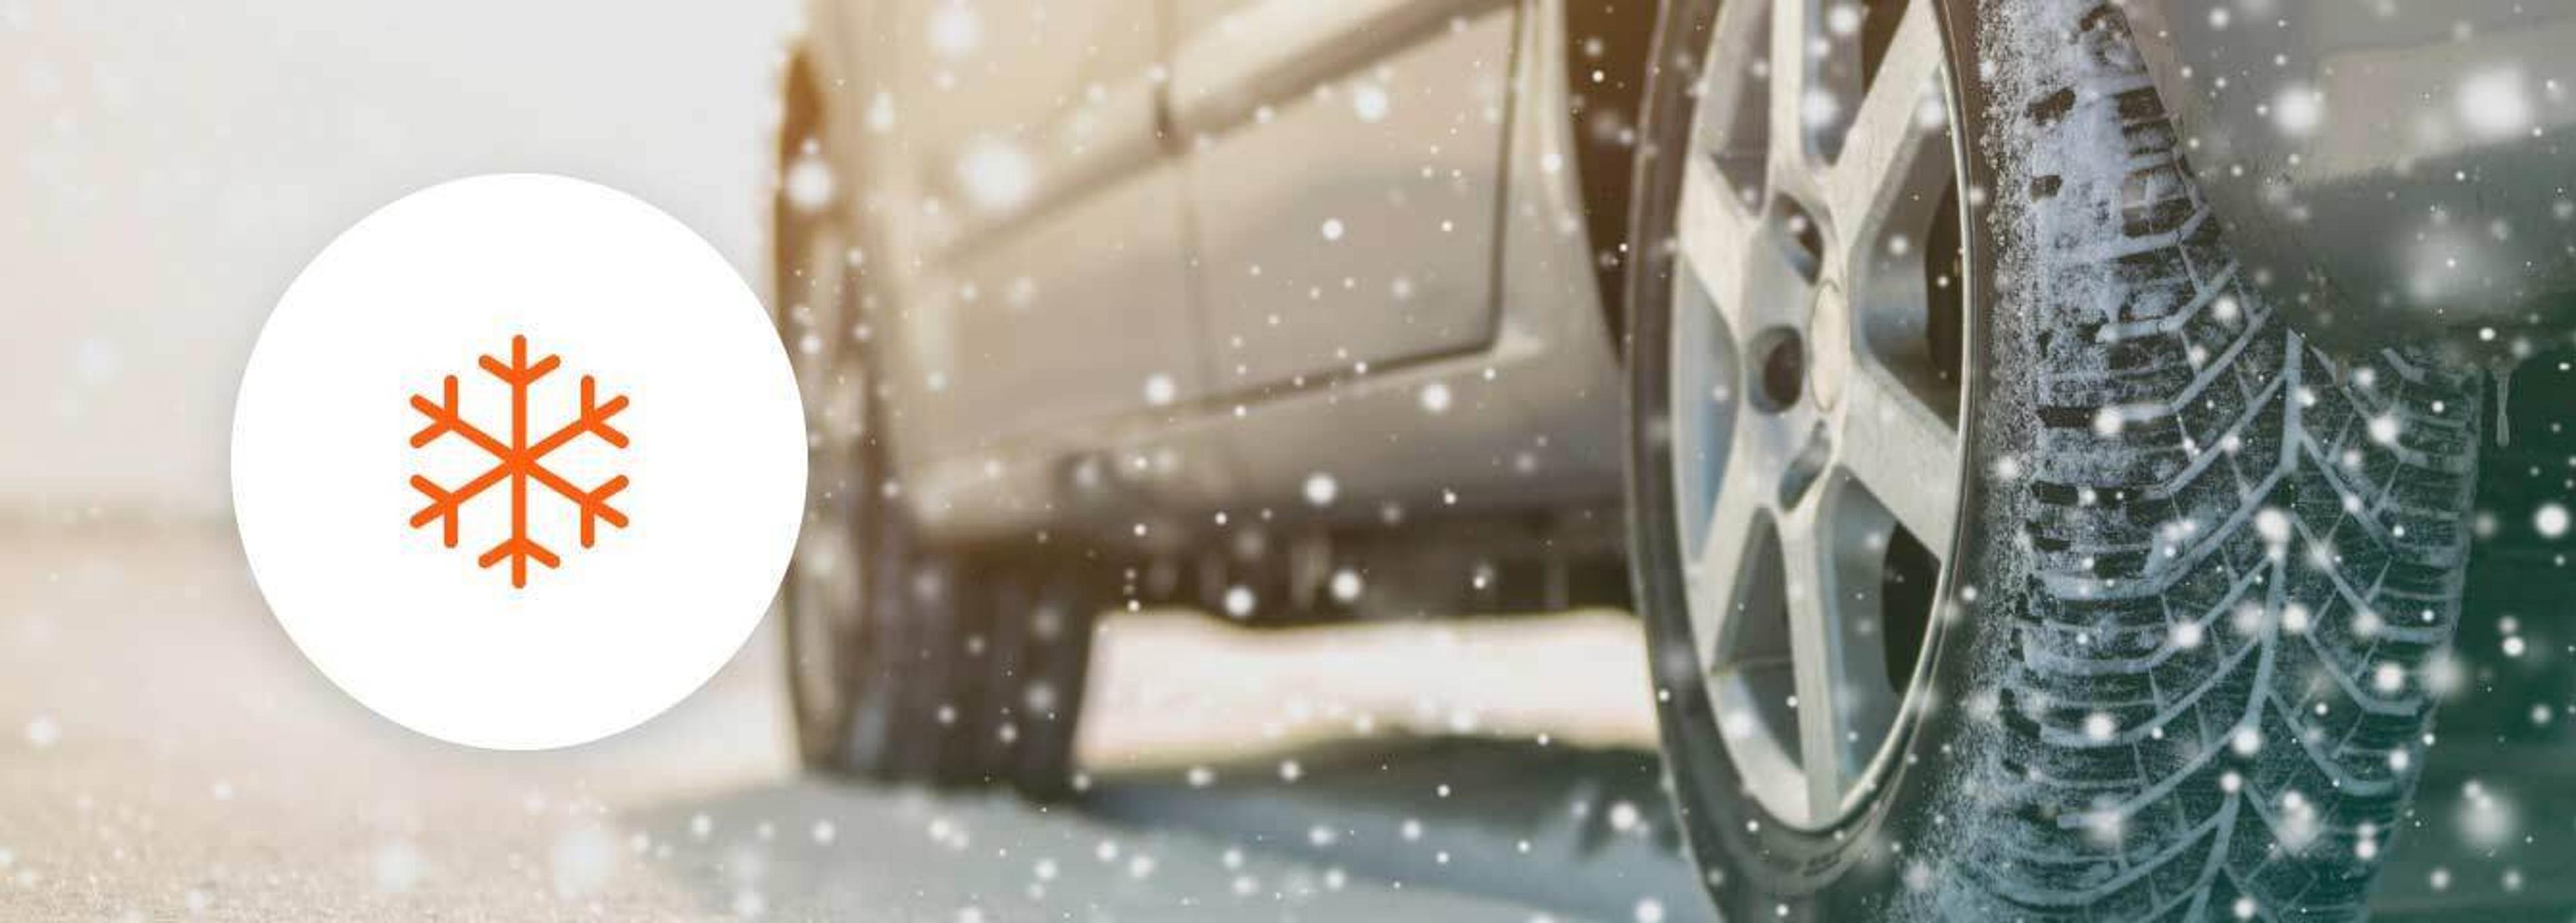 Save up to 30% on Winter tires